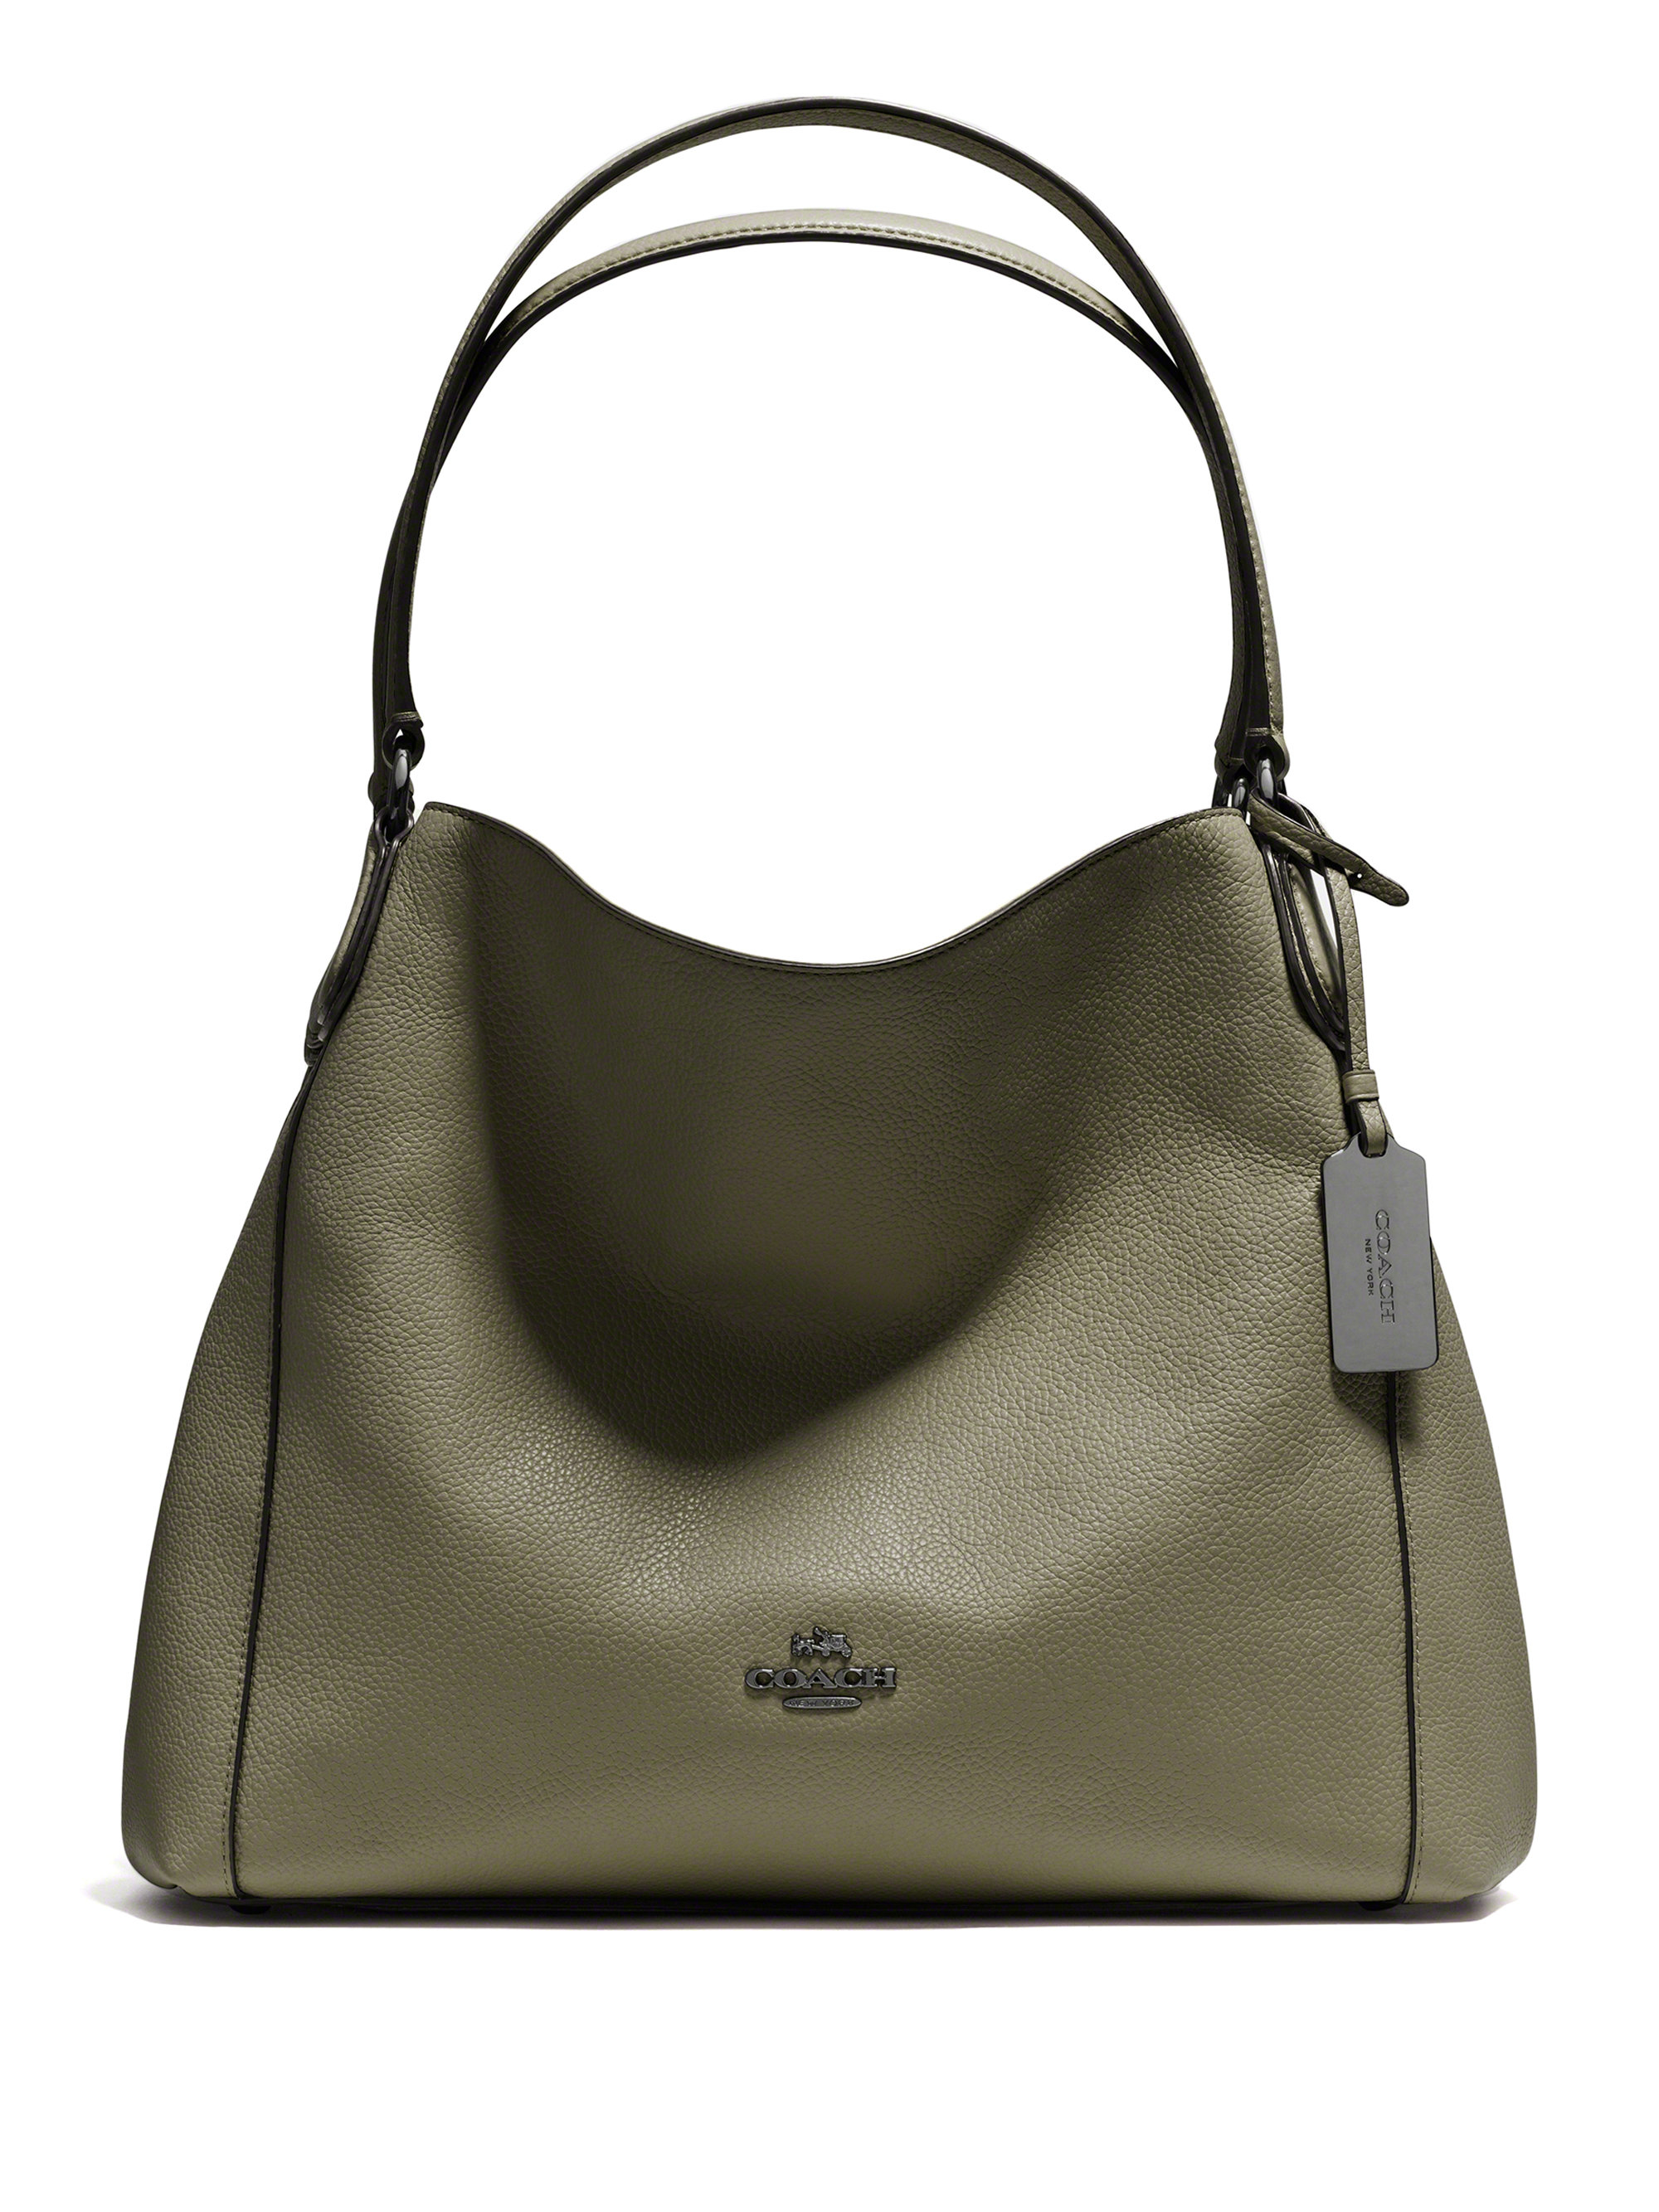 COACH Edie Pebbled Leather Shoulder Bag in Green